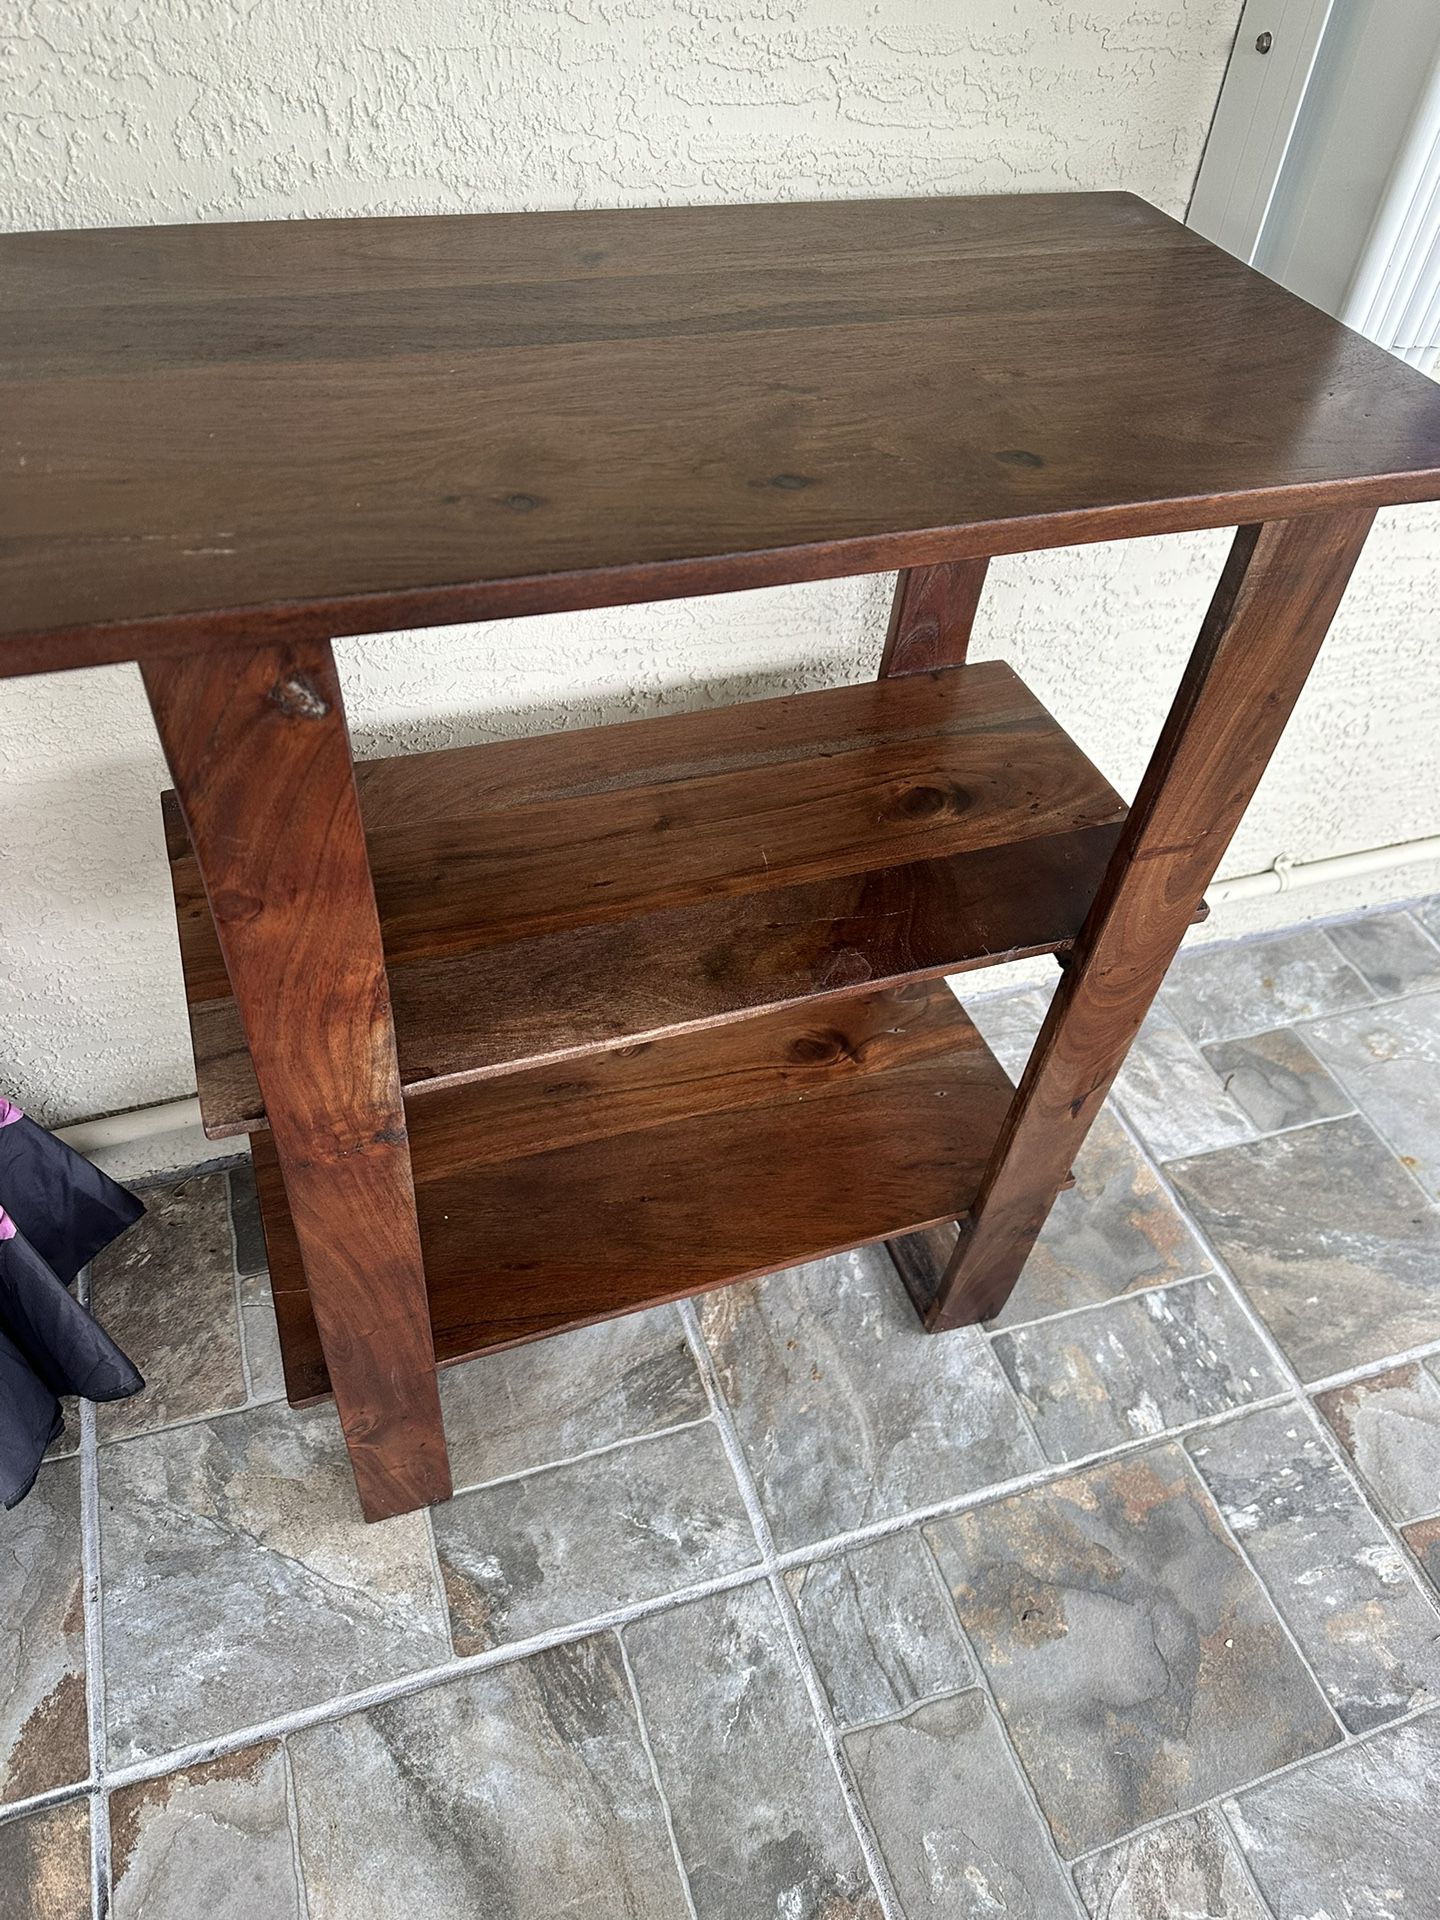 BEAUTIFUL WOOD END TABLE